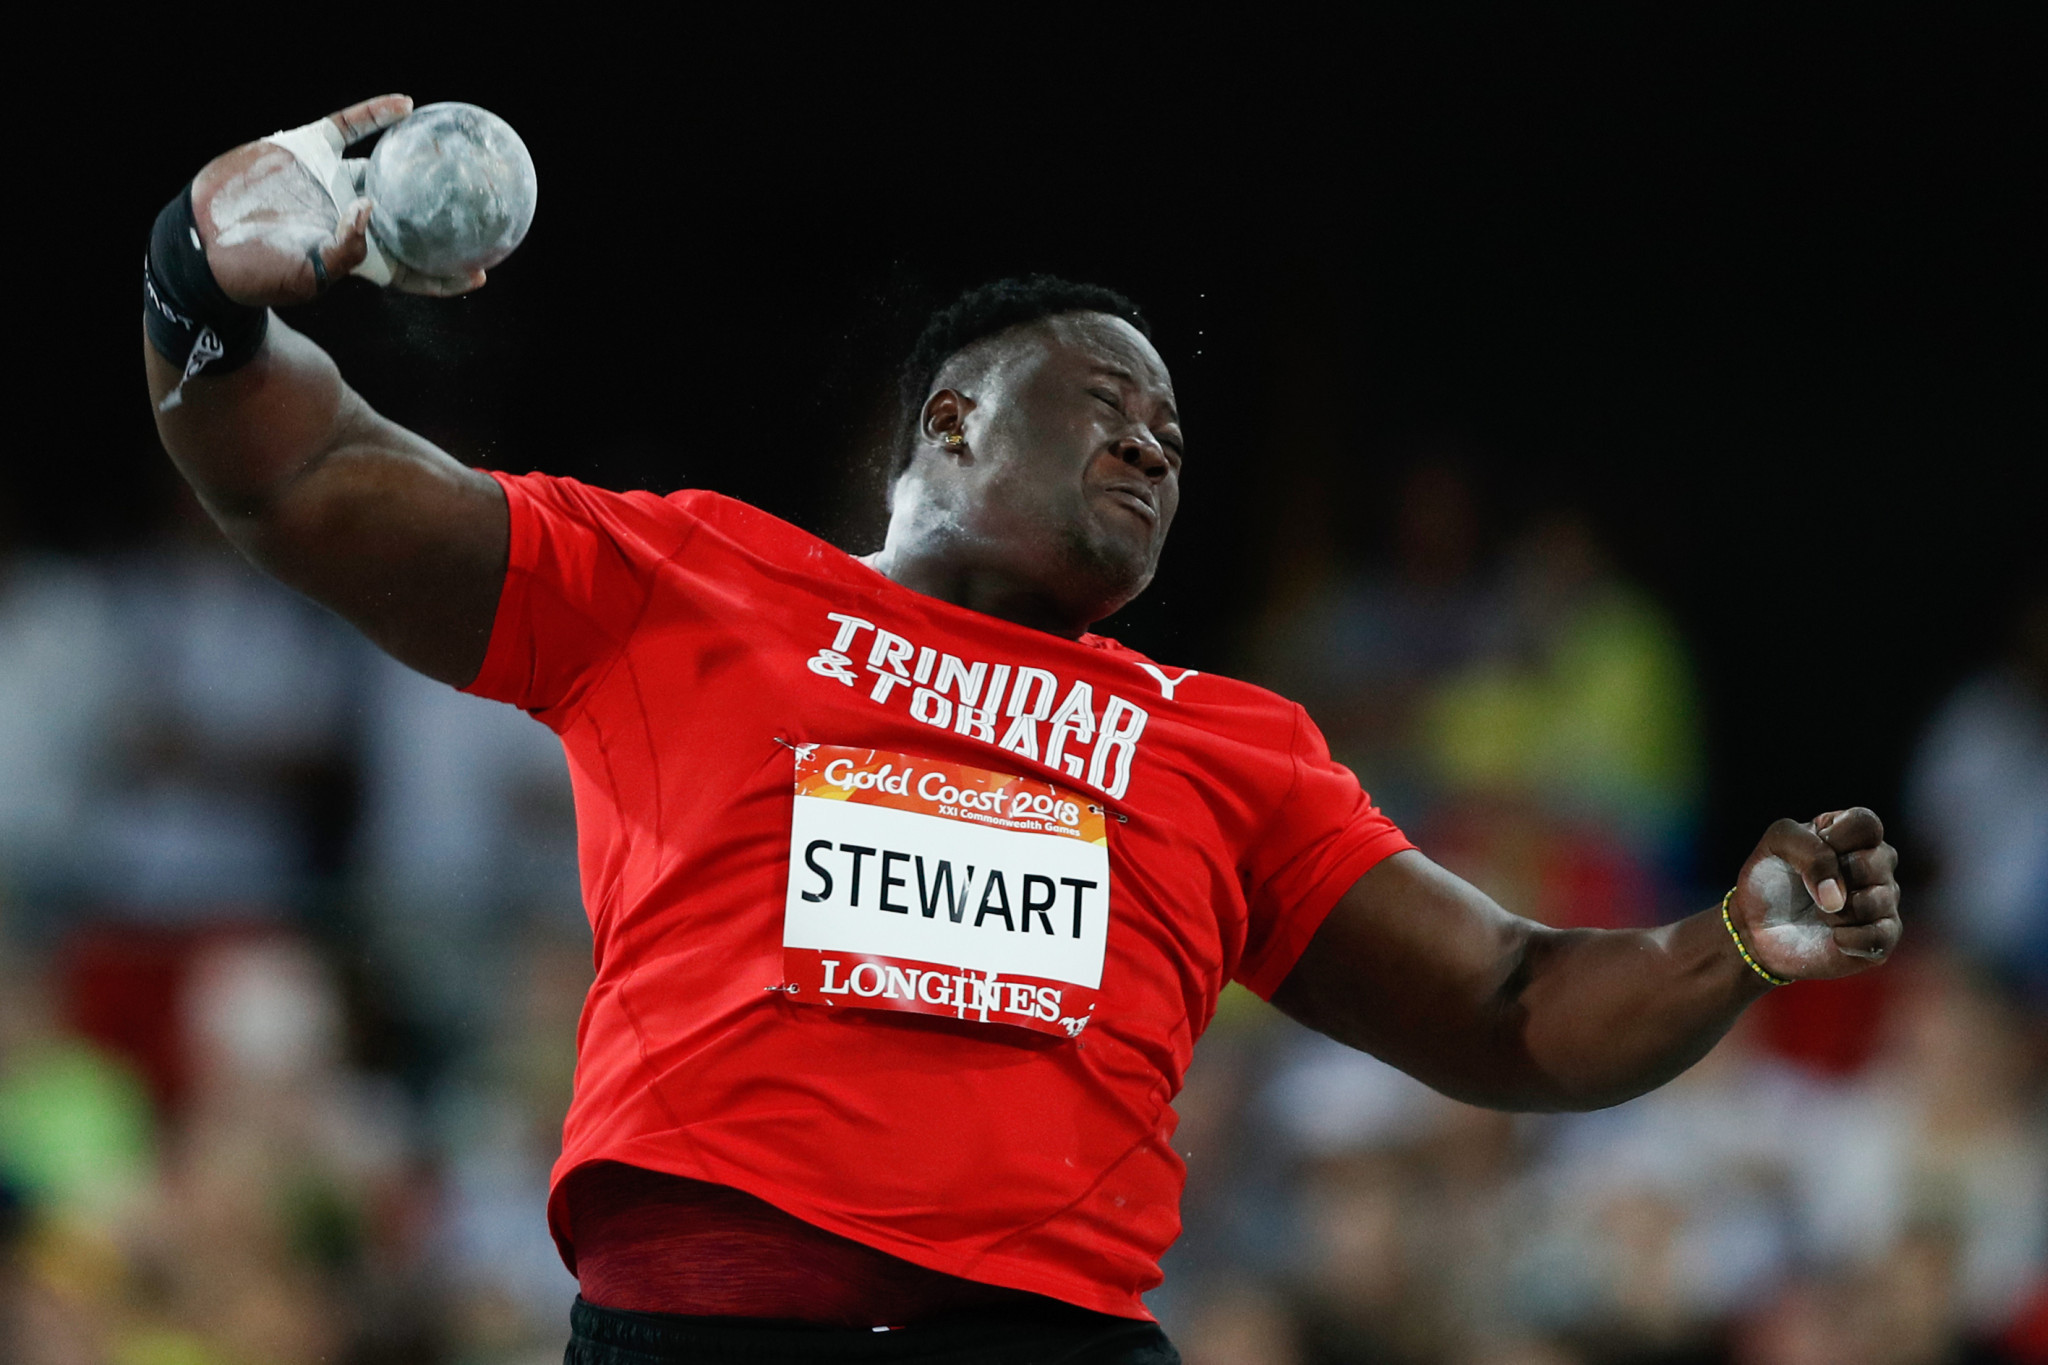 Trinidad and Tobago's Akeem Stewart will be among the athletes to watch at the 2019 World Para Athletics Championships in Dubai ©Getty Images